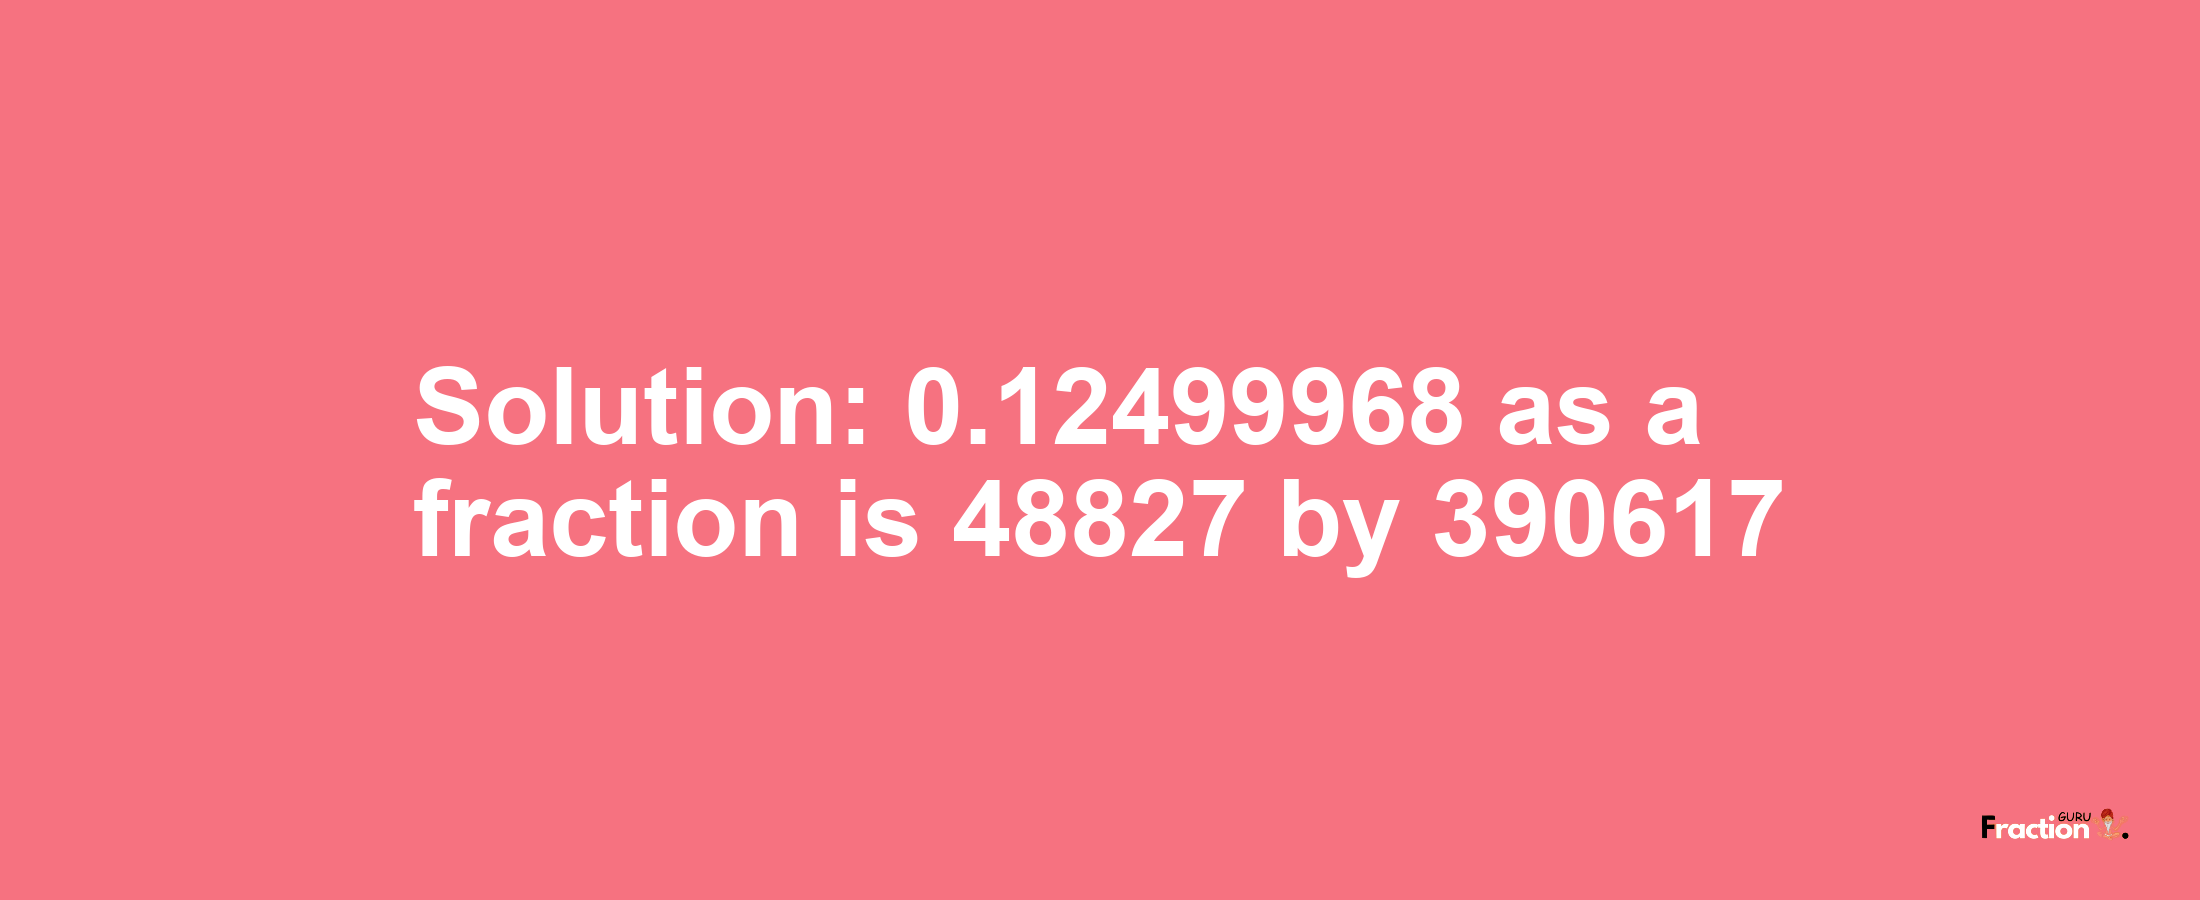 Solution:0.12499968 as a fraction is 48827/390617